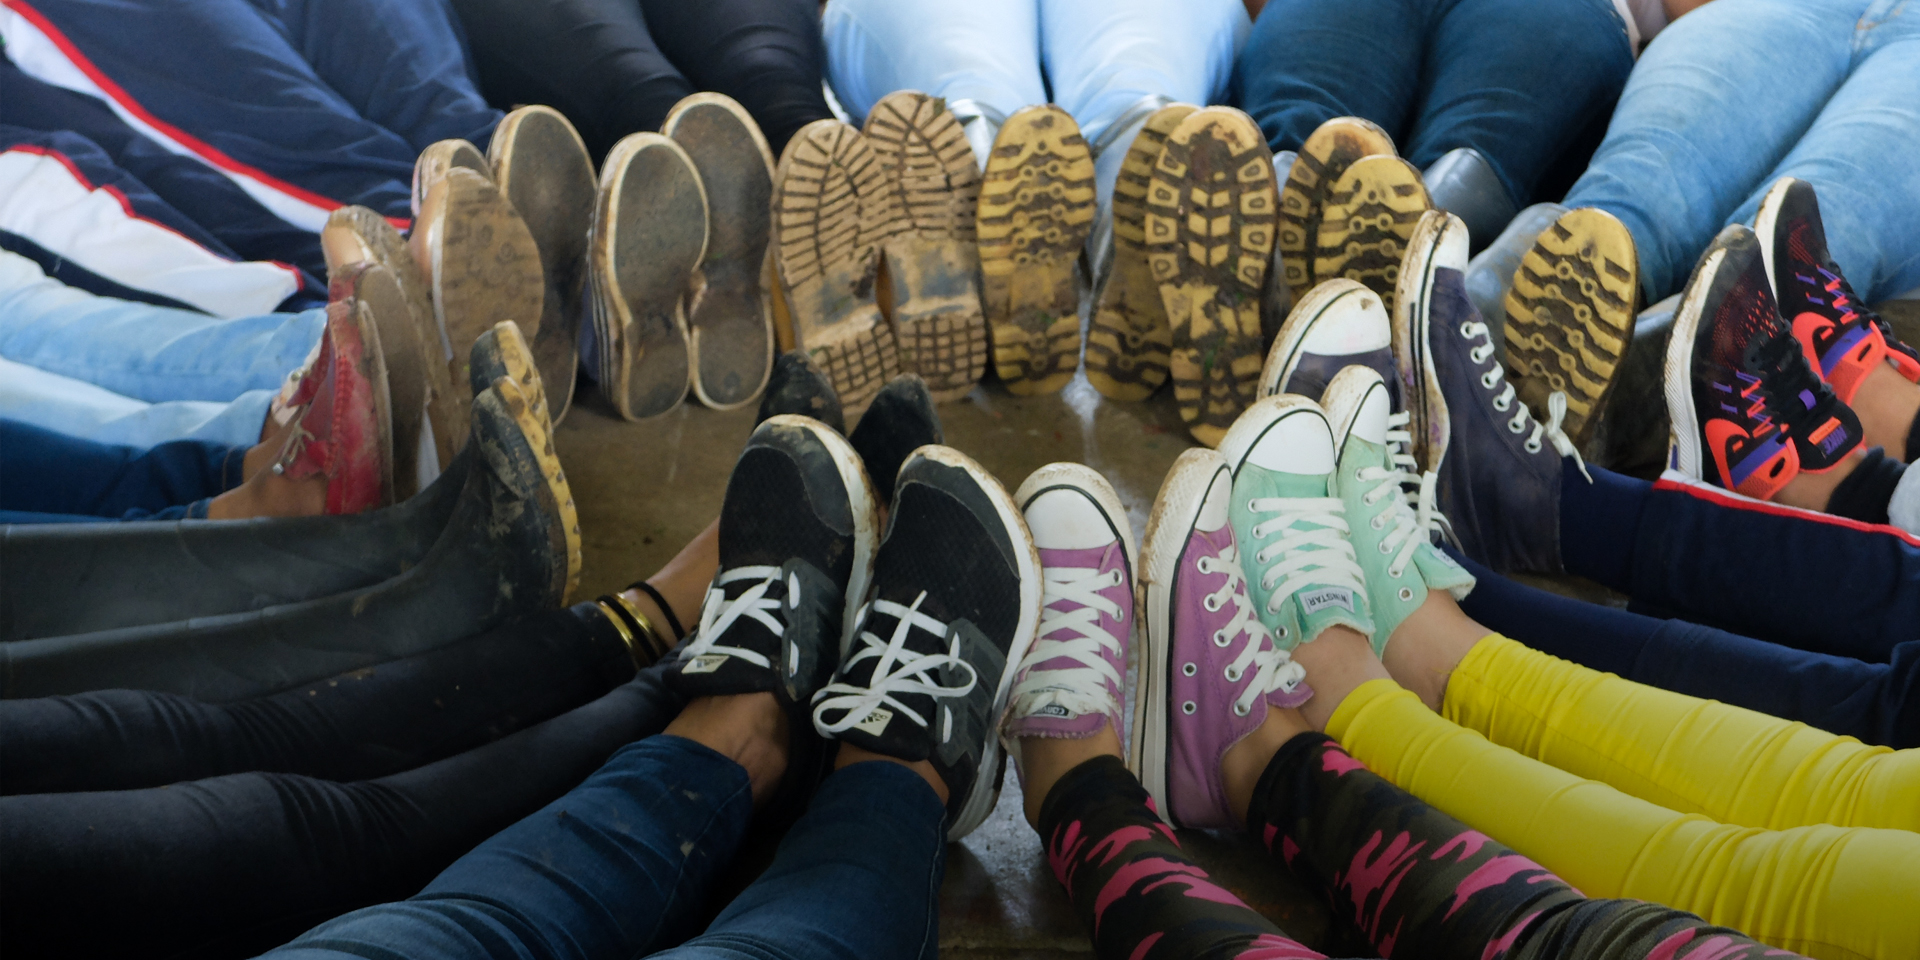 Image of several people putting their shoed feet together in the shape of a circle.